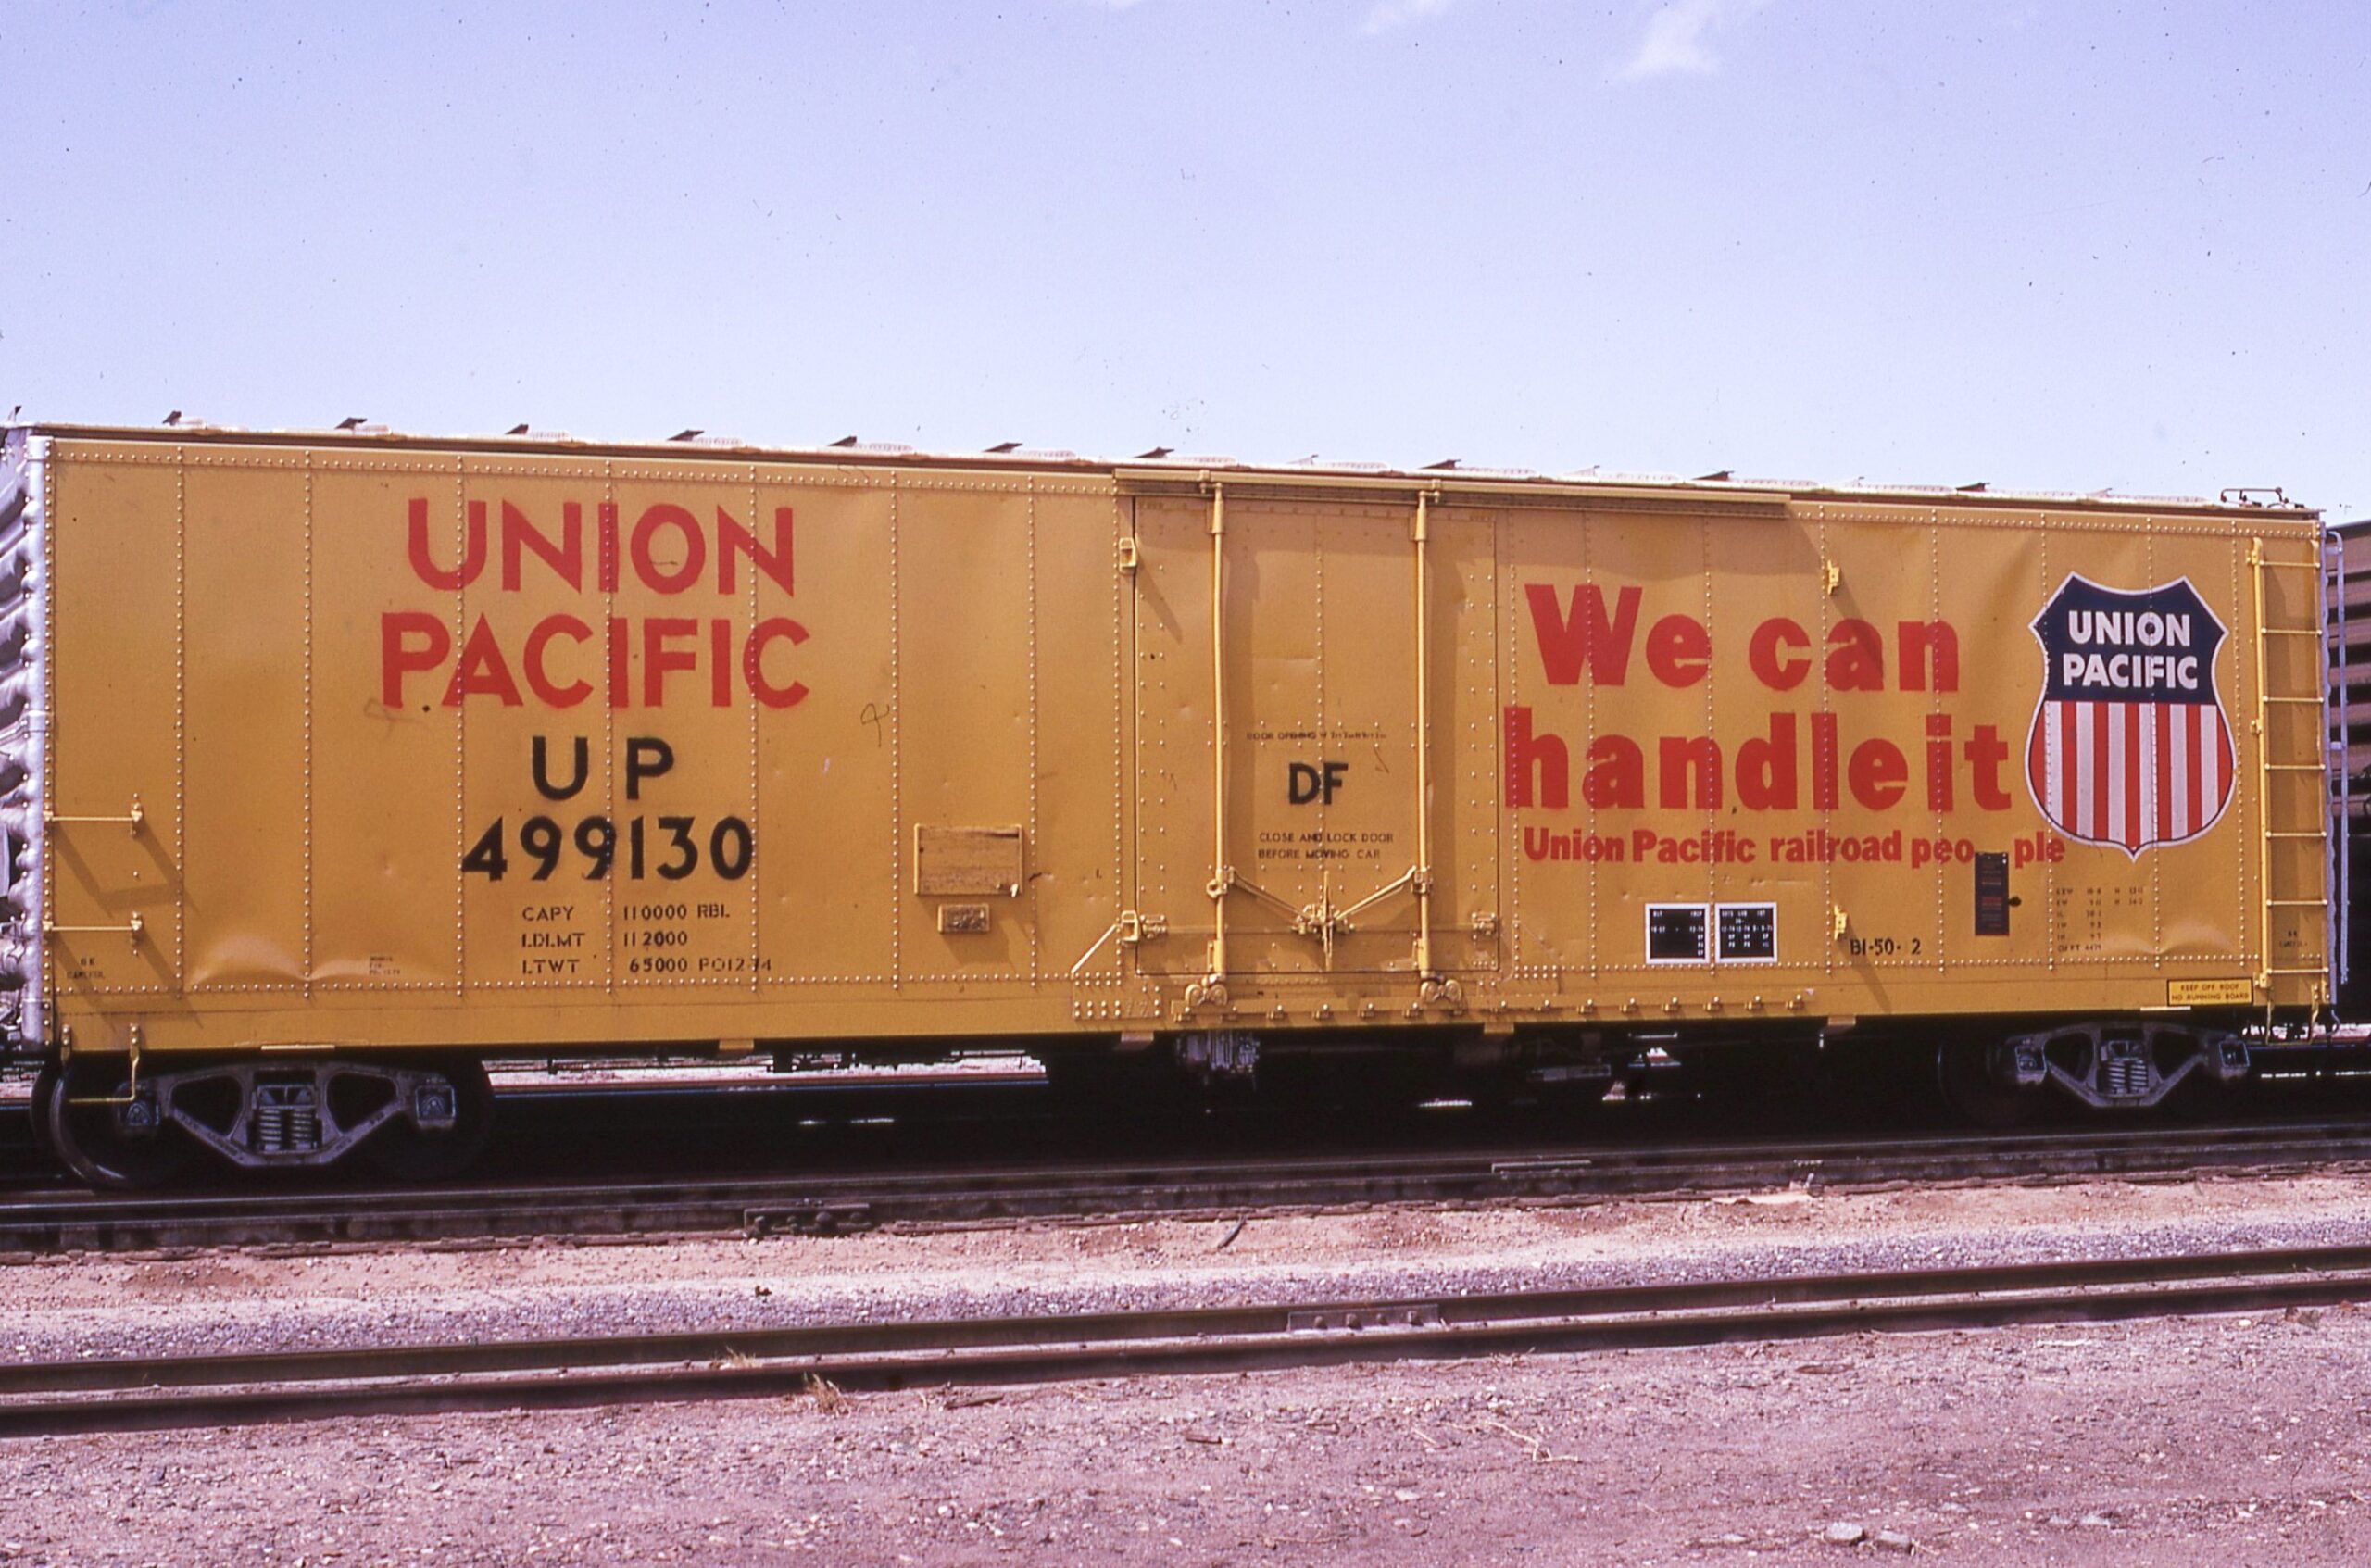 Union Pacific | Las Vegas, Nevada | New We Can Handle It 50 foot 6 inch box car #499130 | March 27, 1975 | Steve Timko Collection